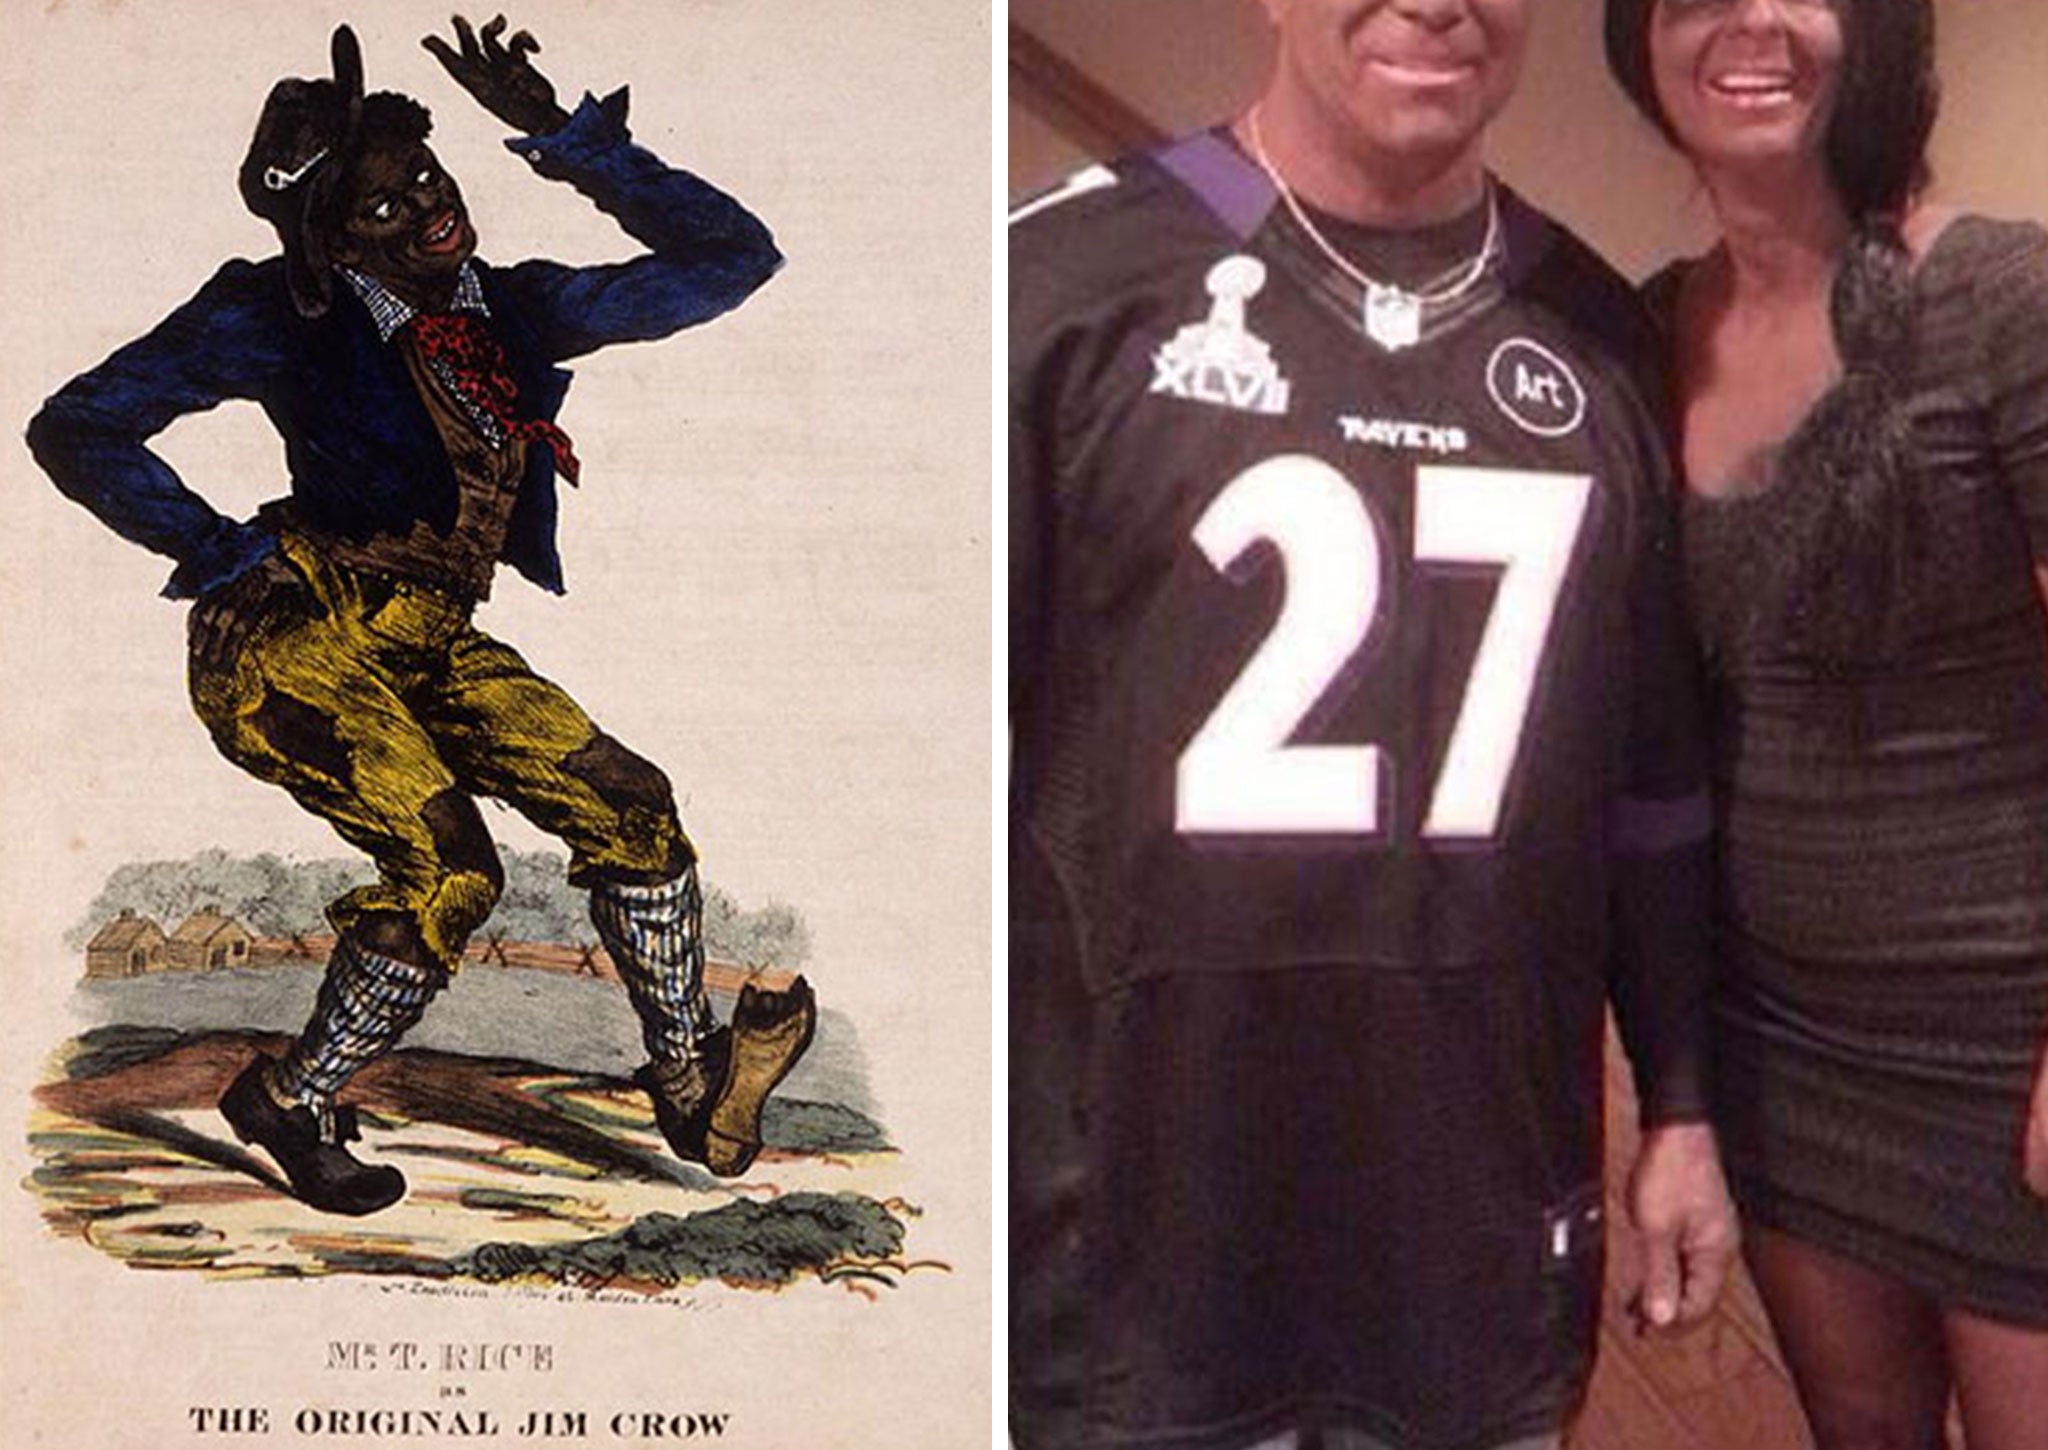 Does anything change? Left: An illustration of the original Jim Crowe, played by TD Rice Right: A Couple dressed as Ray and Janay Rice